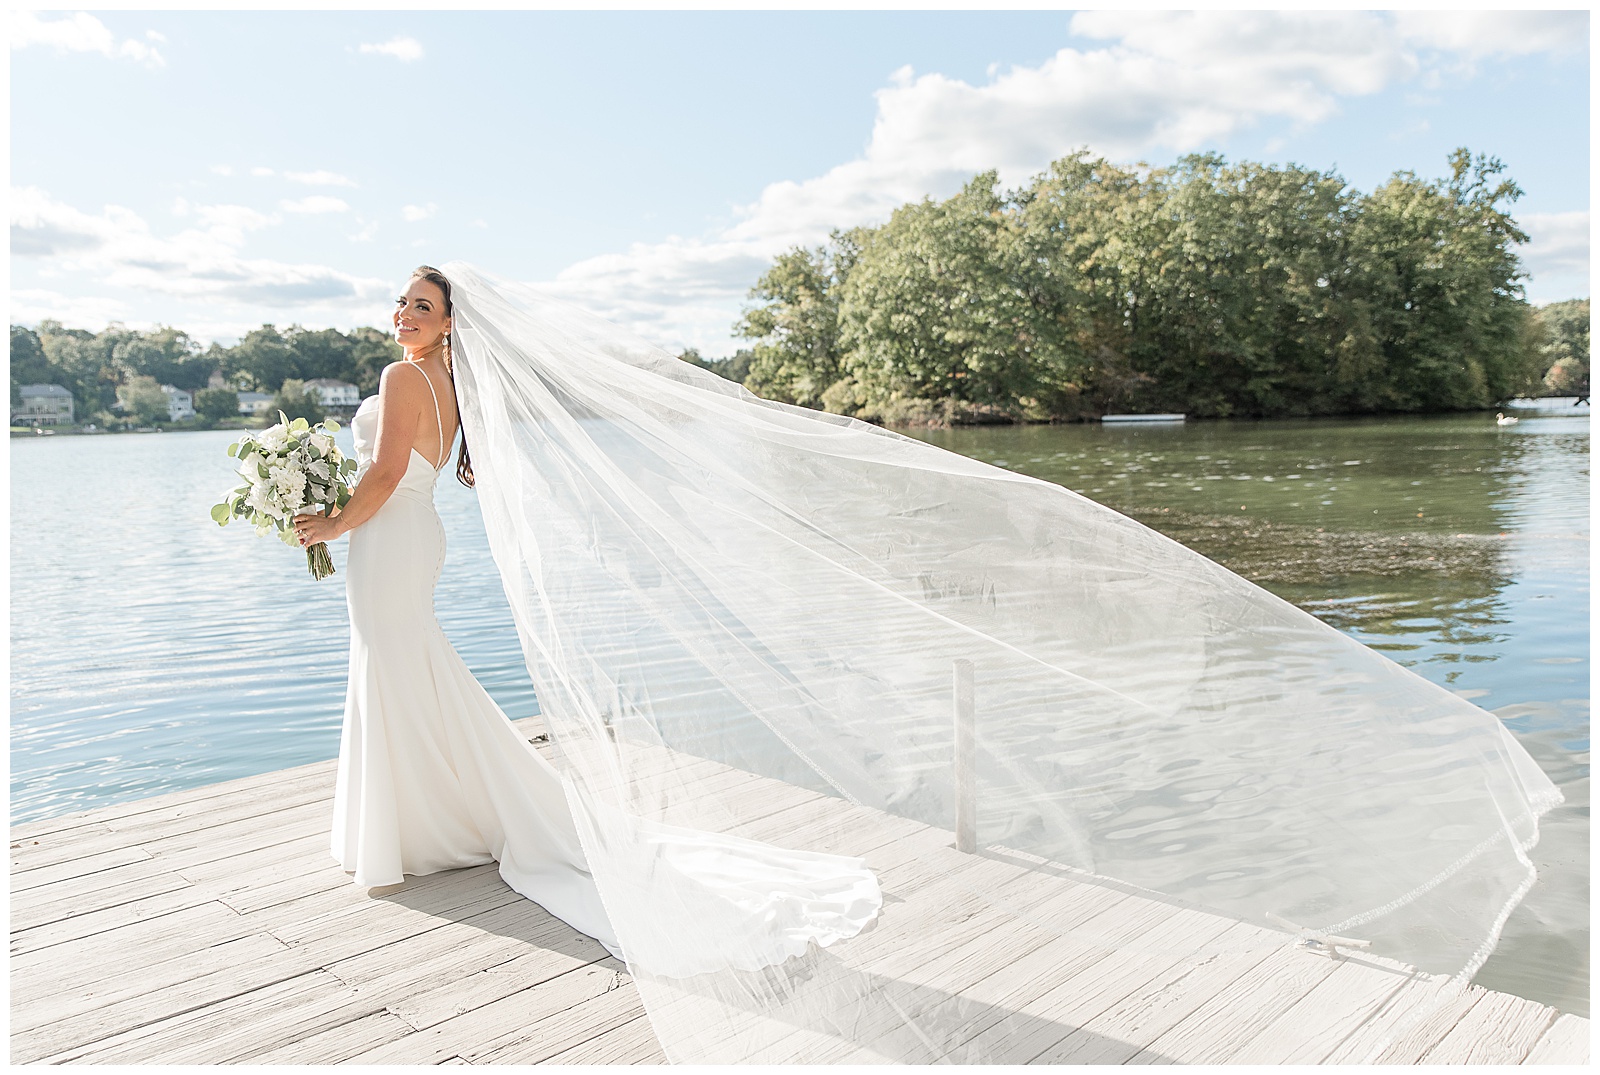 bride looking back over left shoulder at camera with long veil blowing behind her as she stands on dock with water surrounding her in new jersey